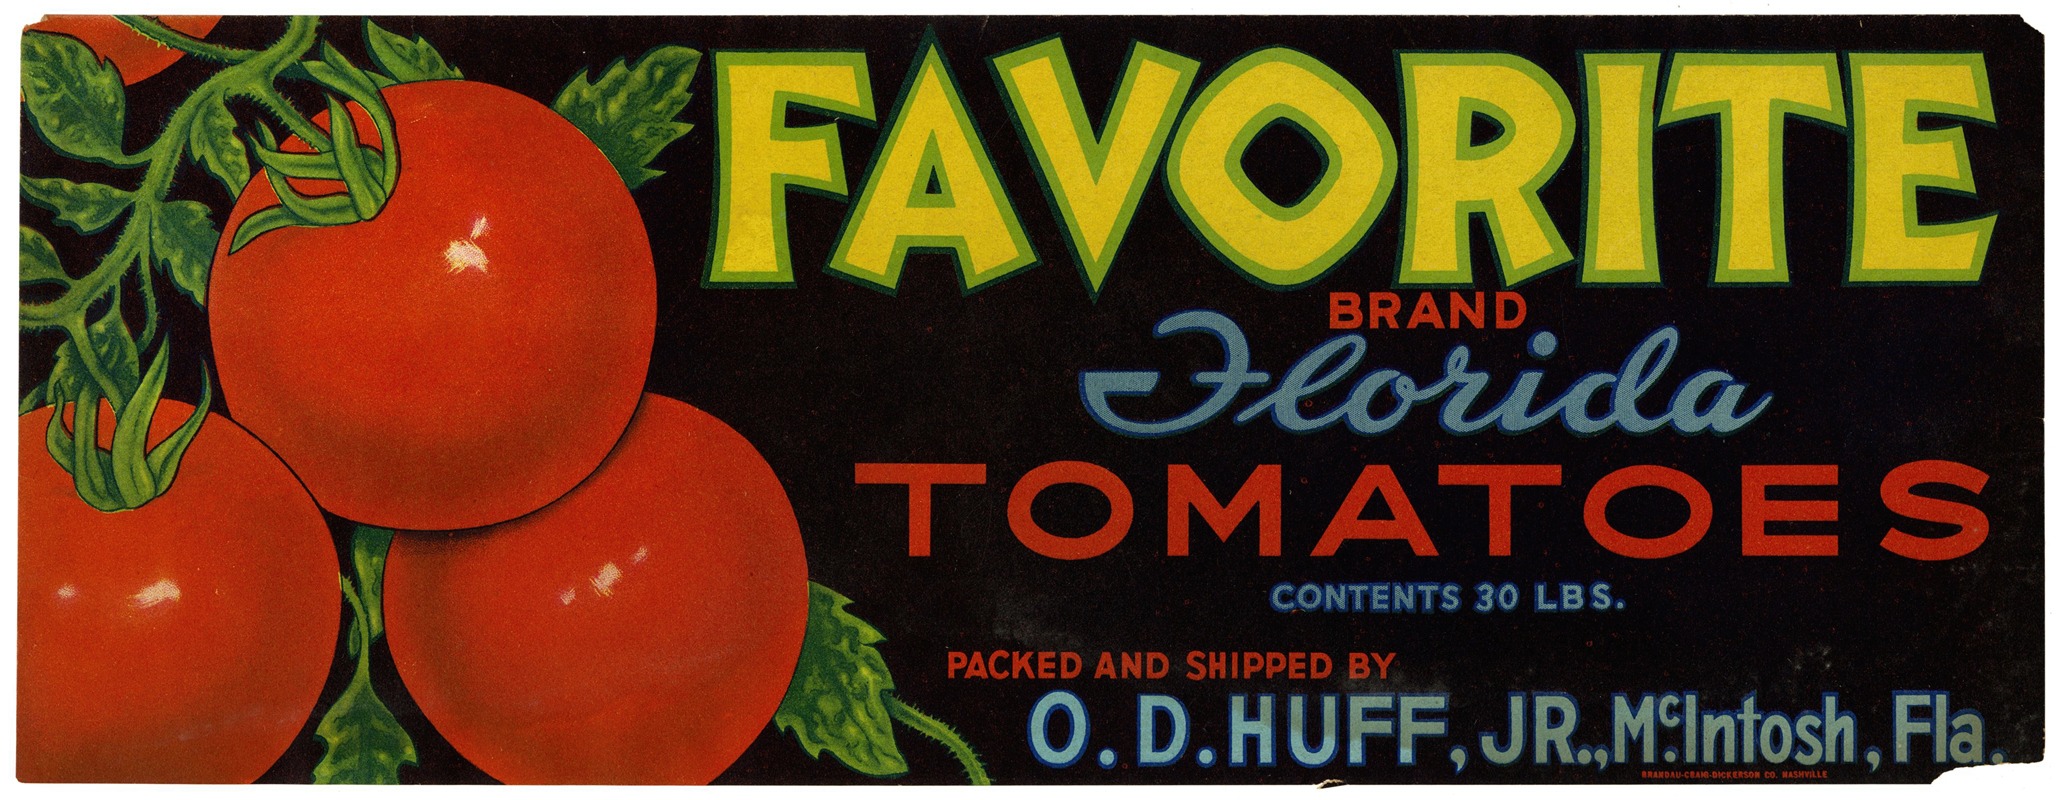 Anonymous - Favorite Brand Florida Tomatoes Label